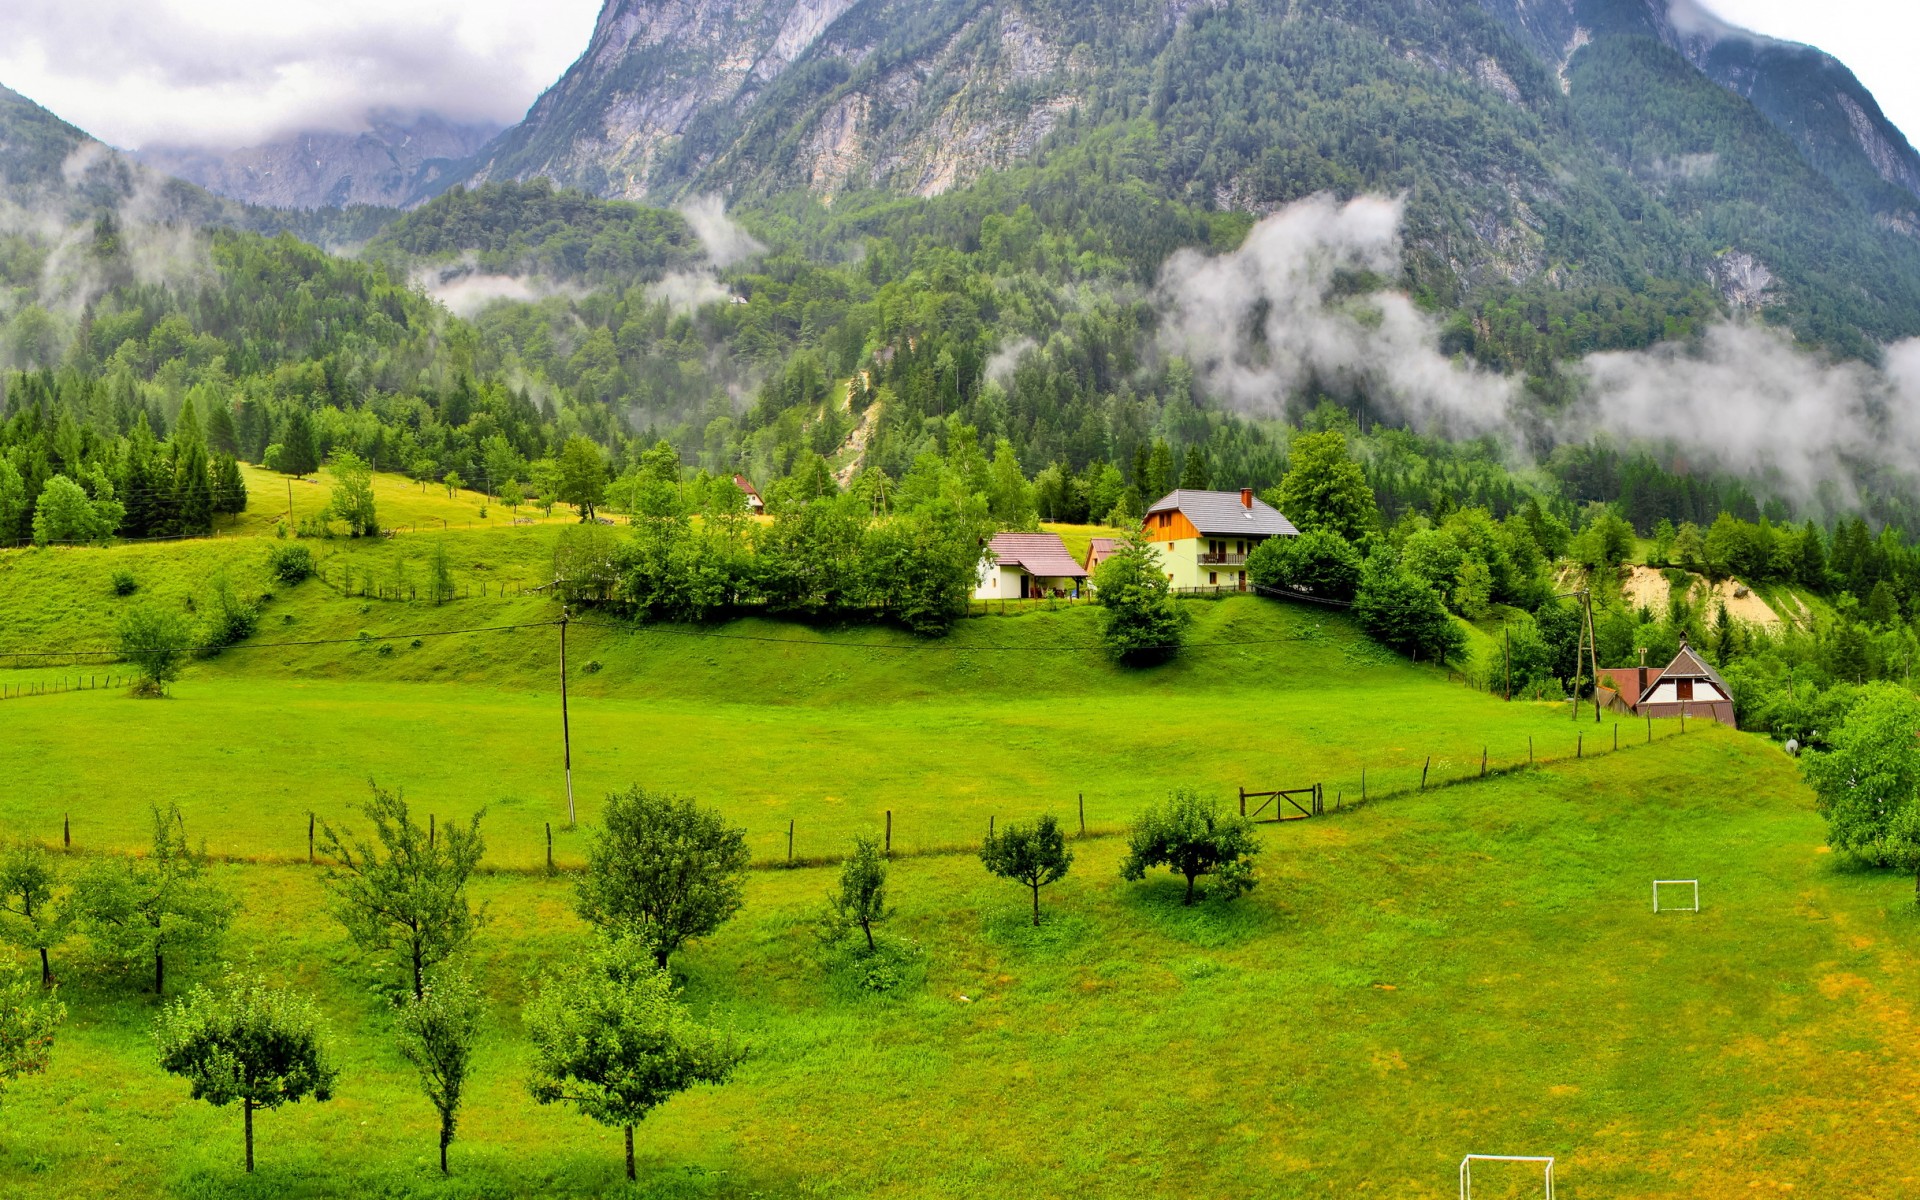 slovenia, Mountains, Trees, Wood, Houses, Clouds, Grass, Meado Wallpaper